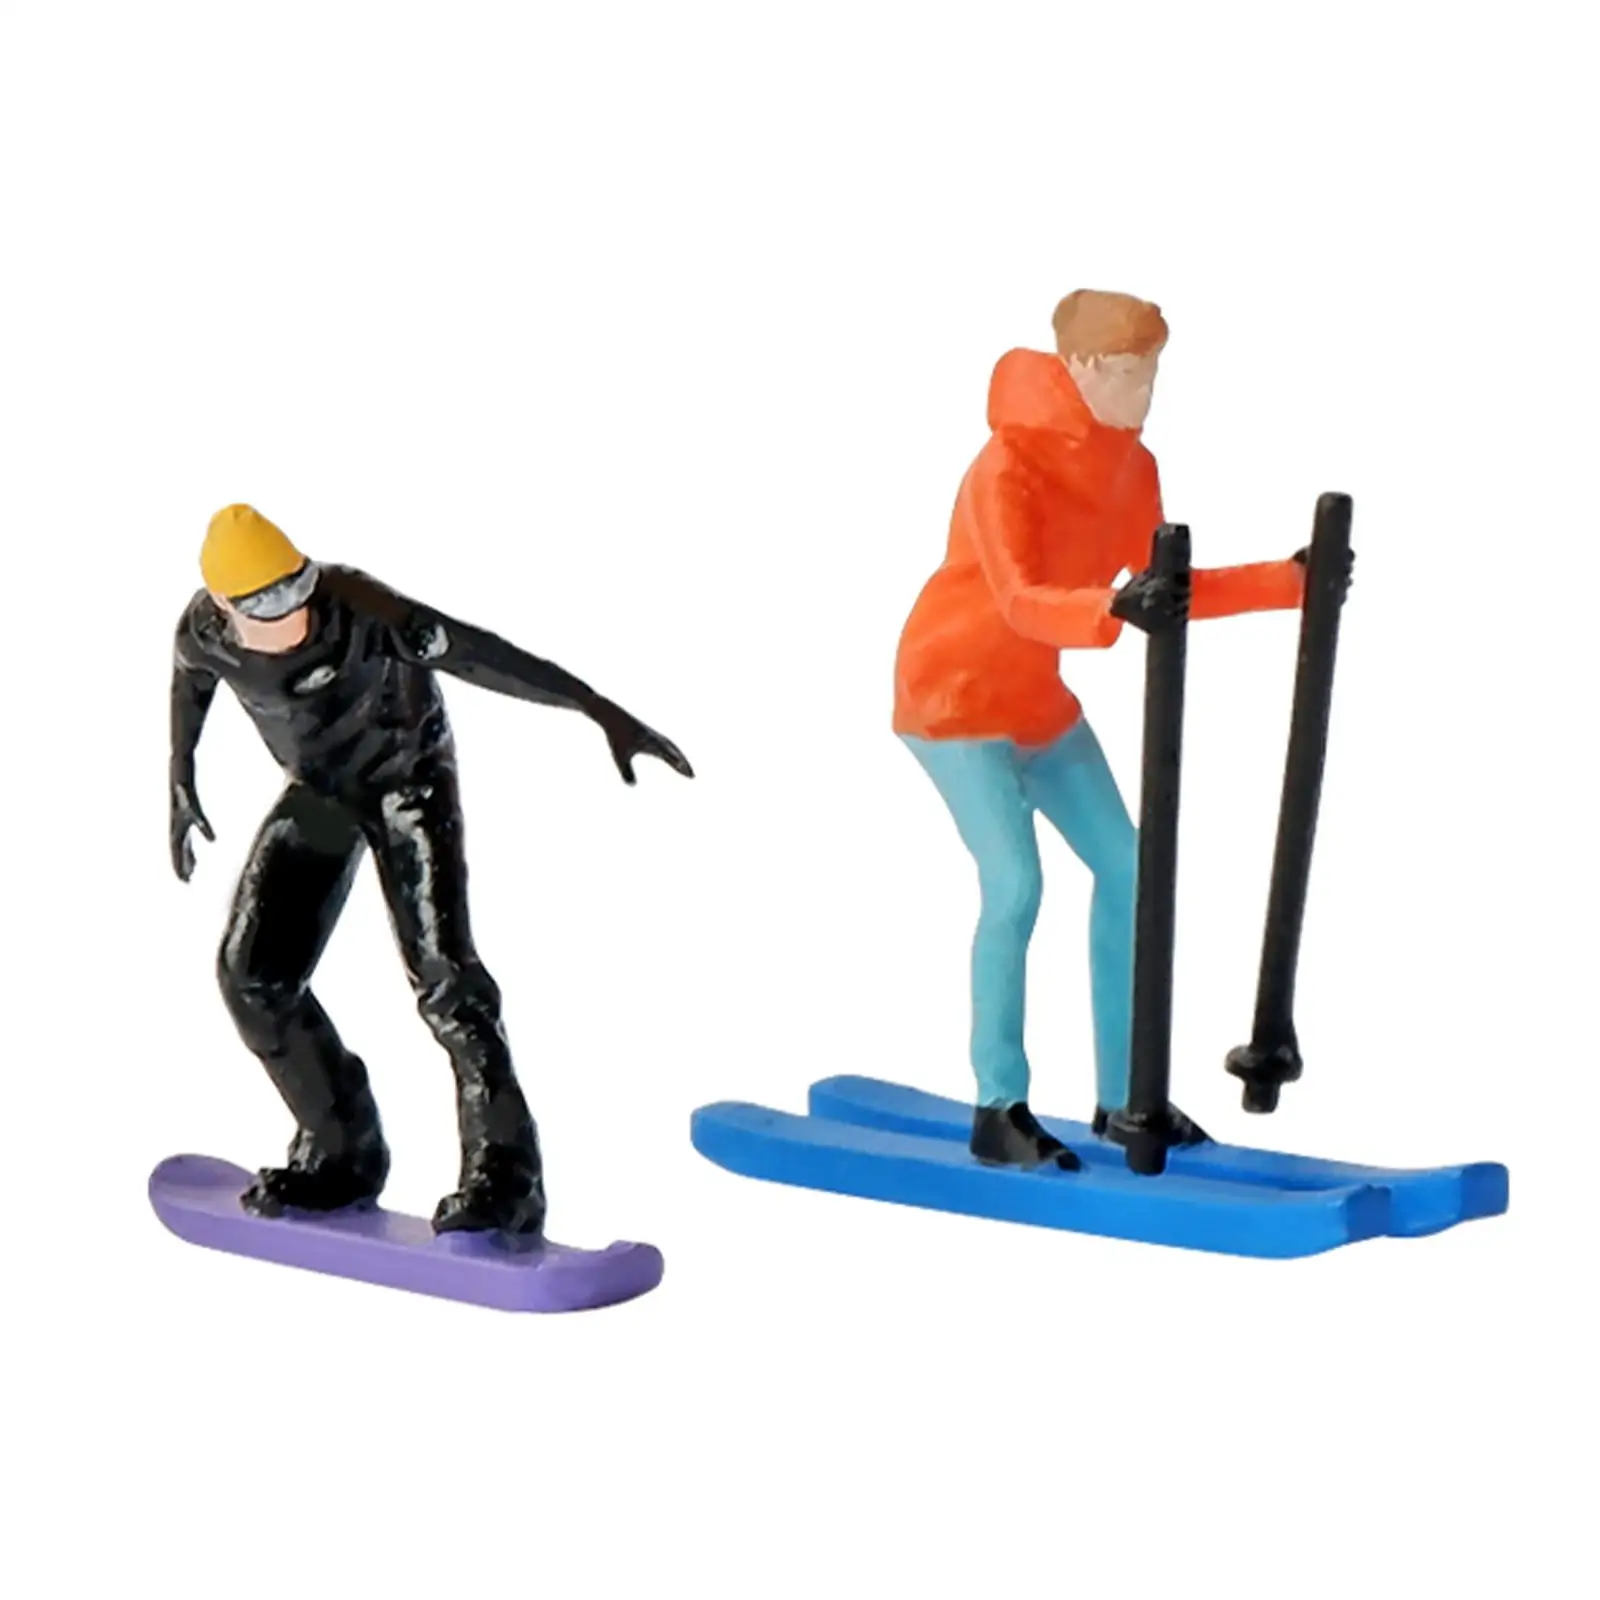 Skiing Model People Figures Simulation Figurines Realistic Figures Ornament for DIY Scene Dollhouse Sand Table Layout Decoration